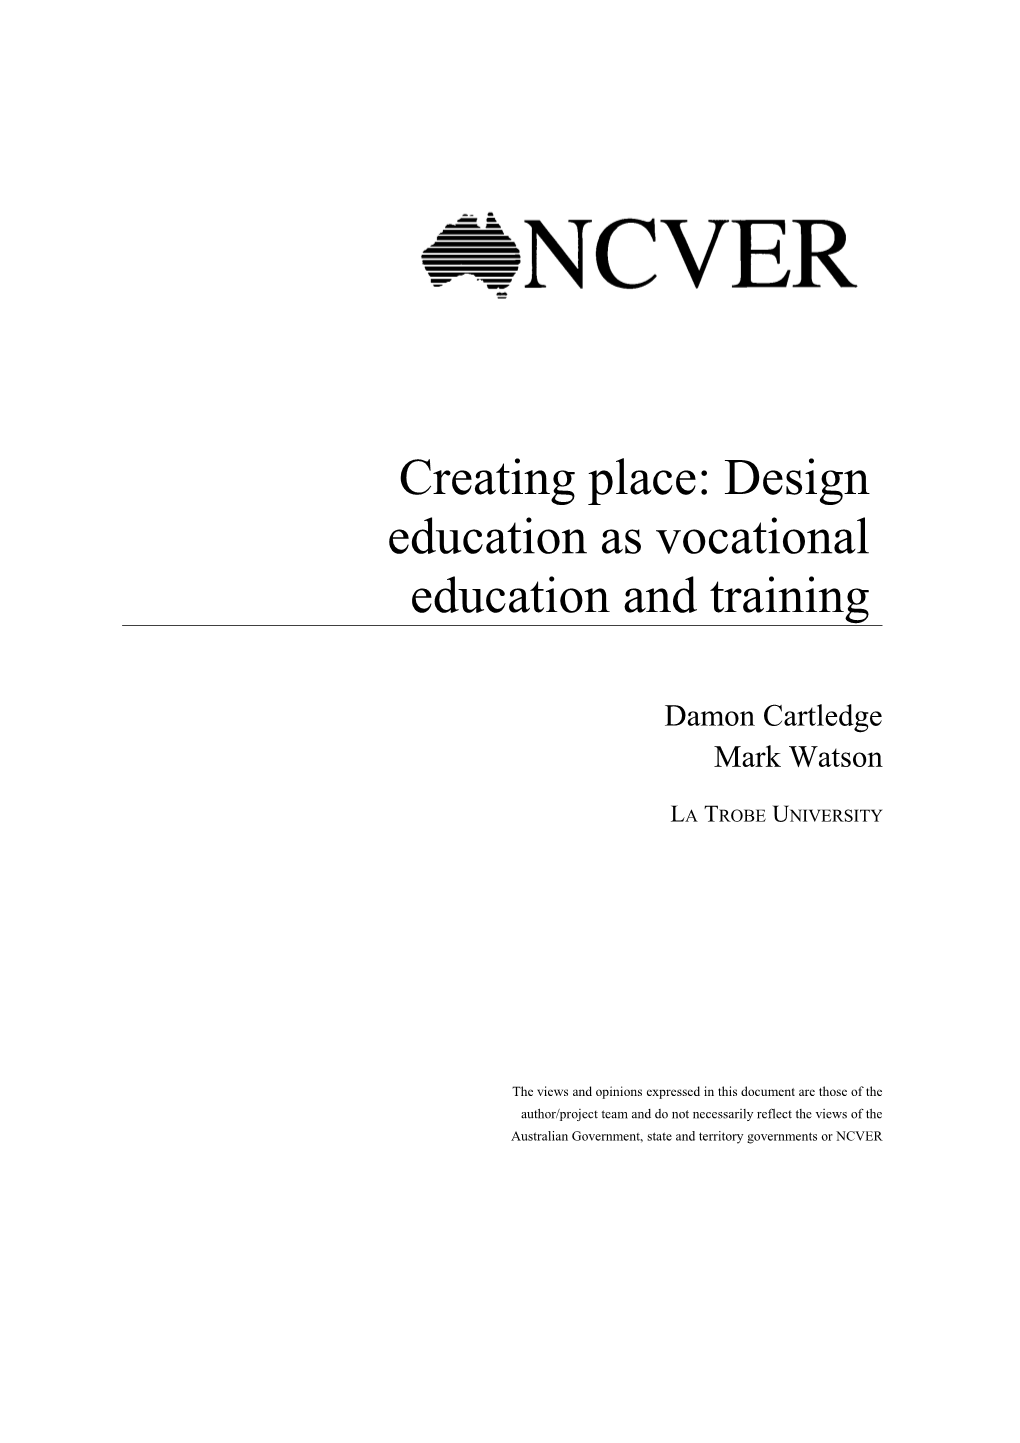 Creating Place: Design Education As Vocational Education and Training